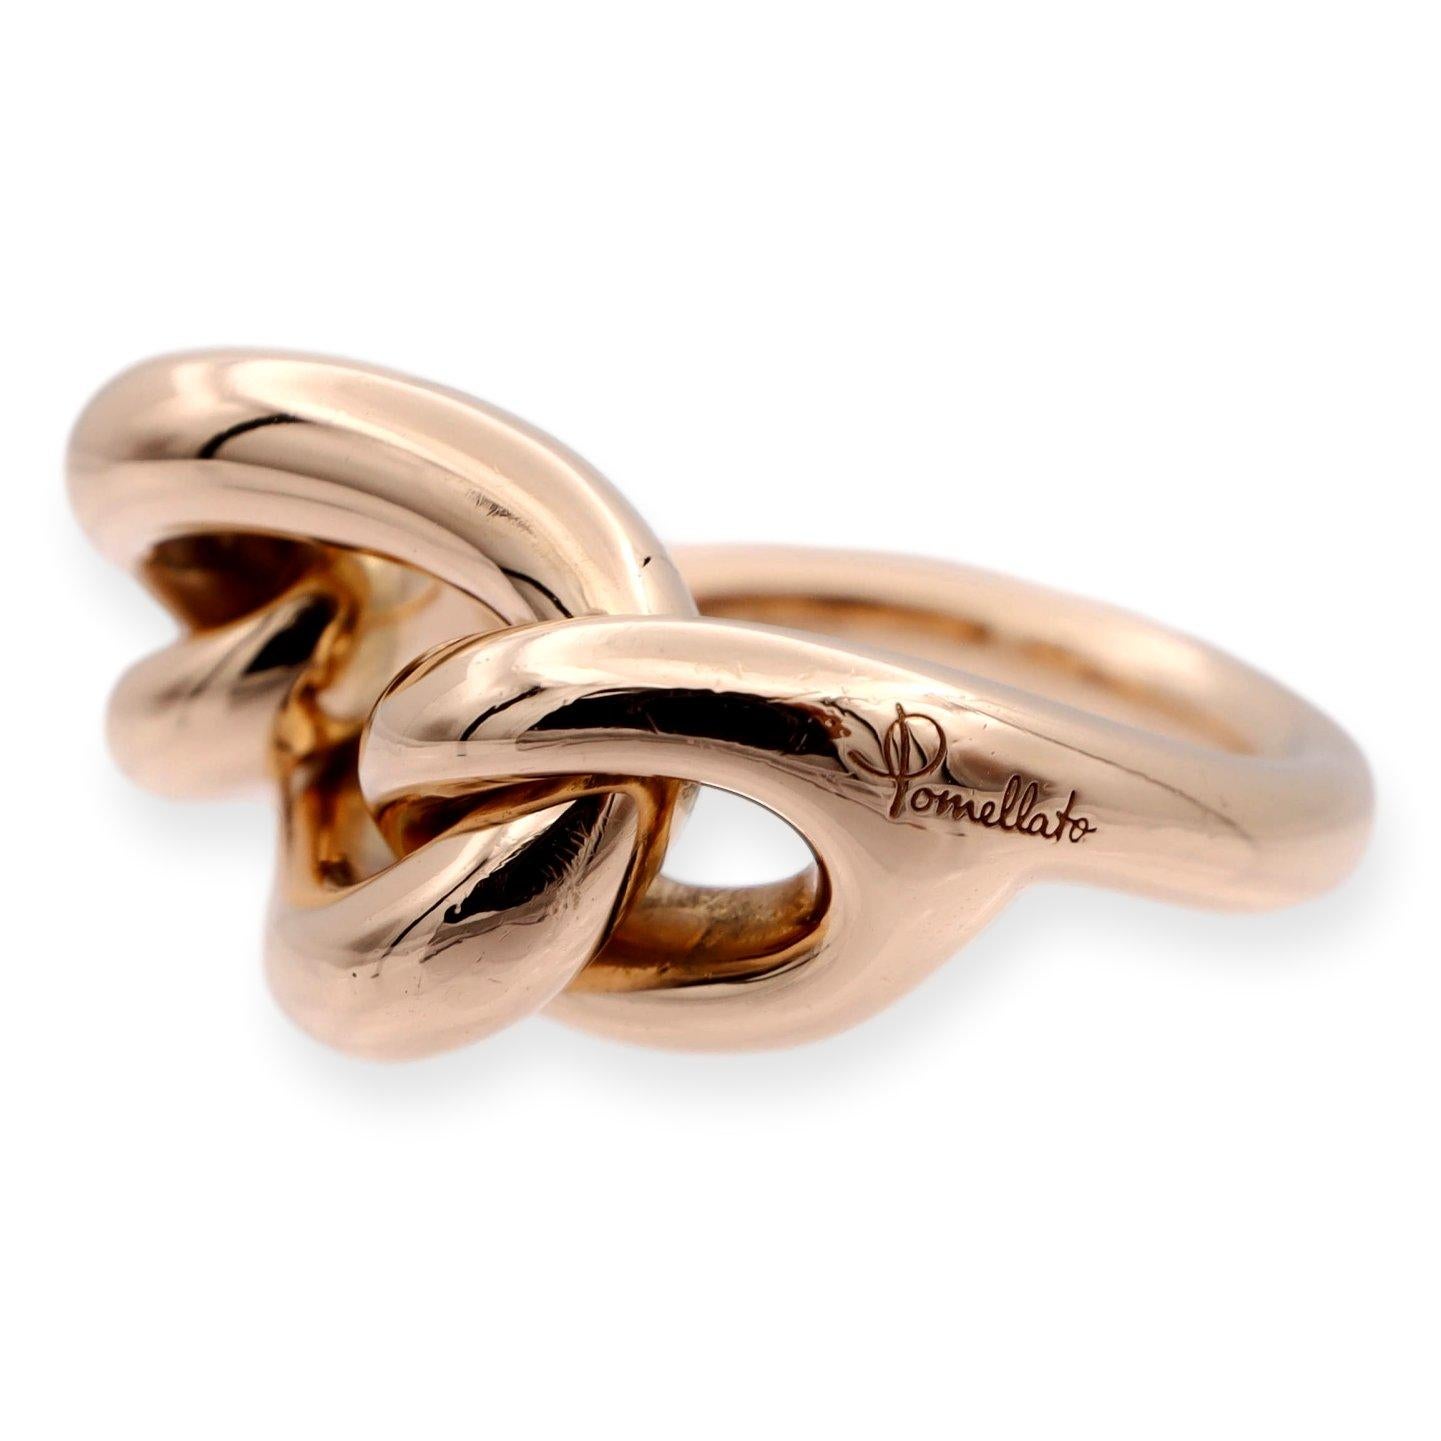 Pomellato ring from the Iconica Tango collection finely crafted in 18K rose gold with an interlocking moveable chain design.  Front measures 12mm wide and band measures 3mm wide. Made in Italy. Fully hallmarked with logo and metal content.

Ring